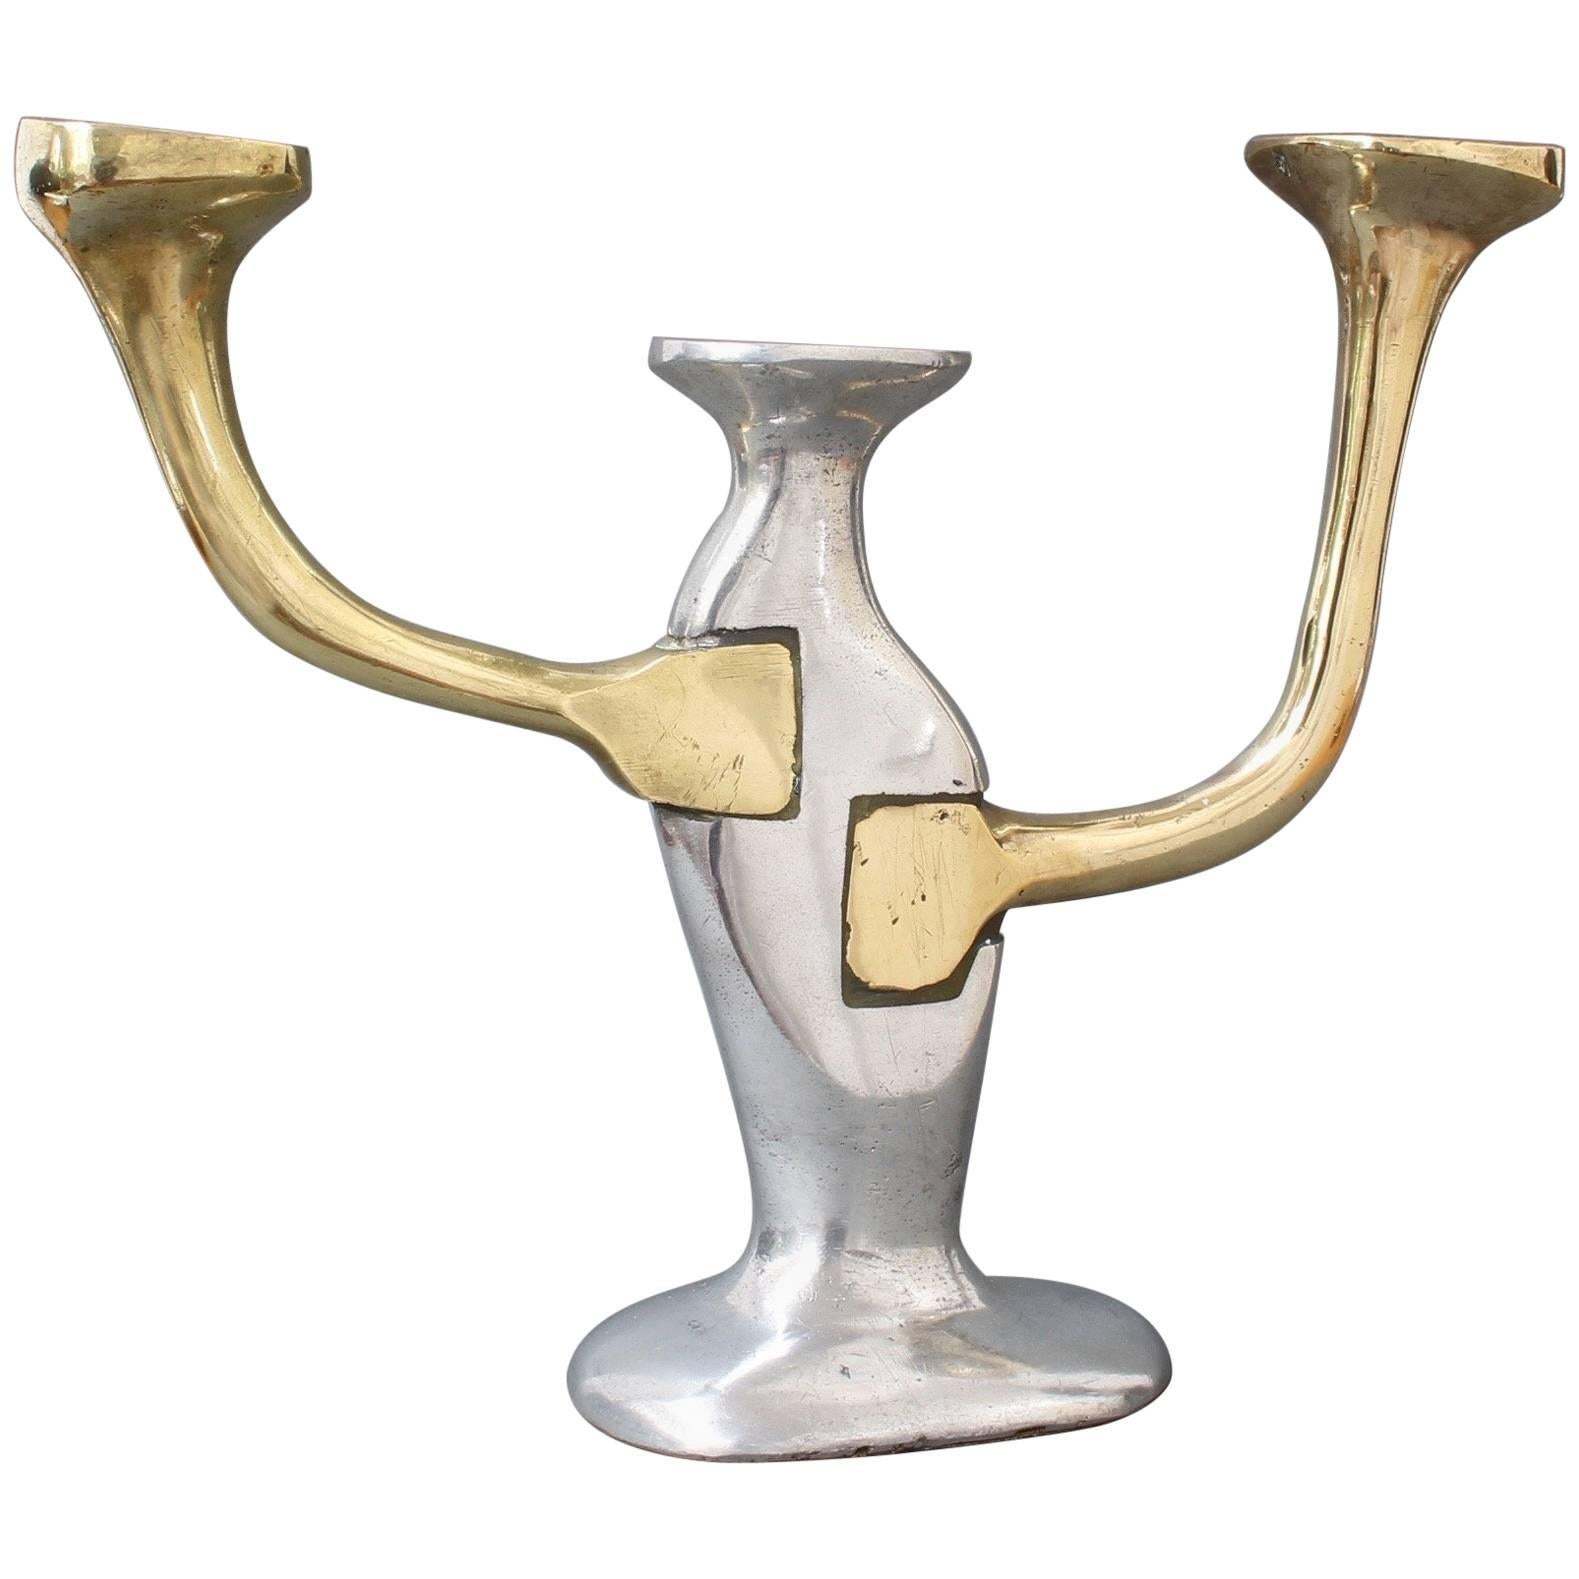 Aluminium and Brass Brutalist Style Candleholder by David Marshall, circa 1970s